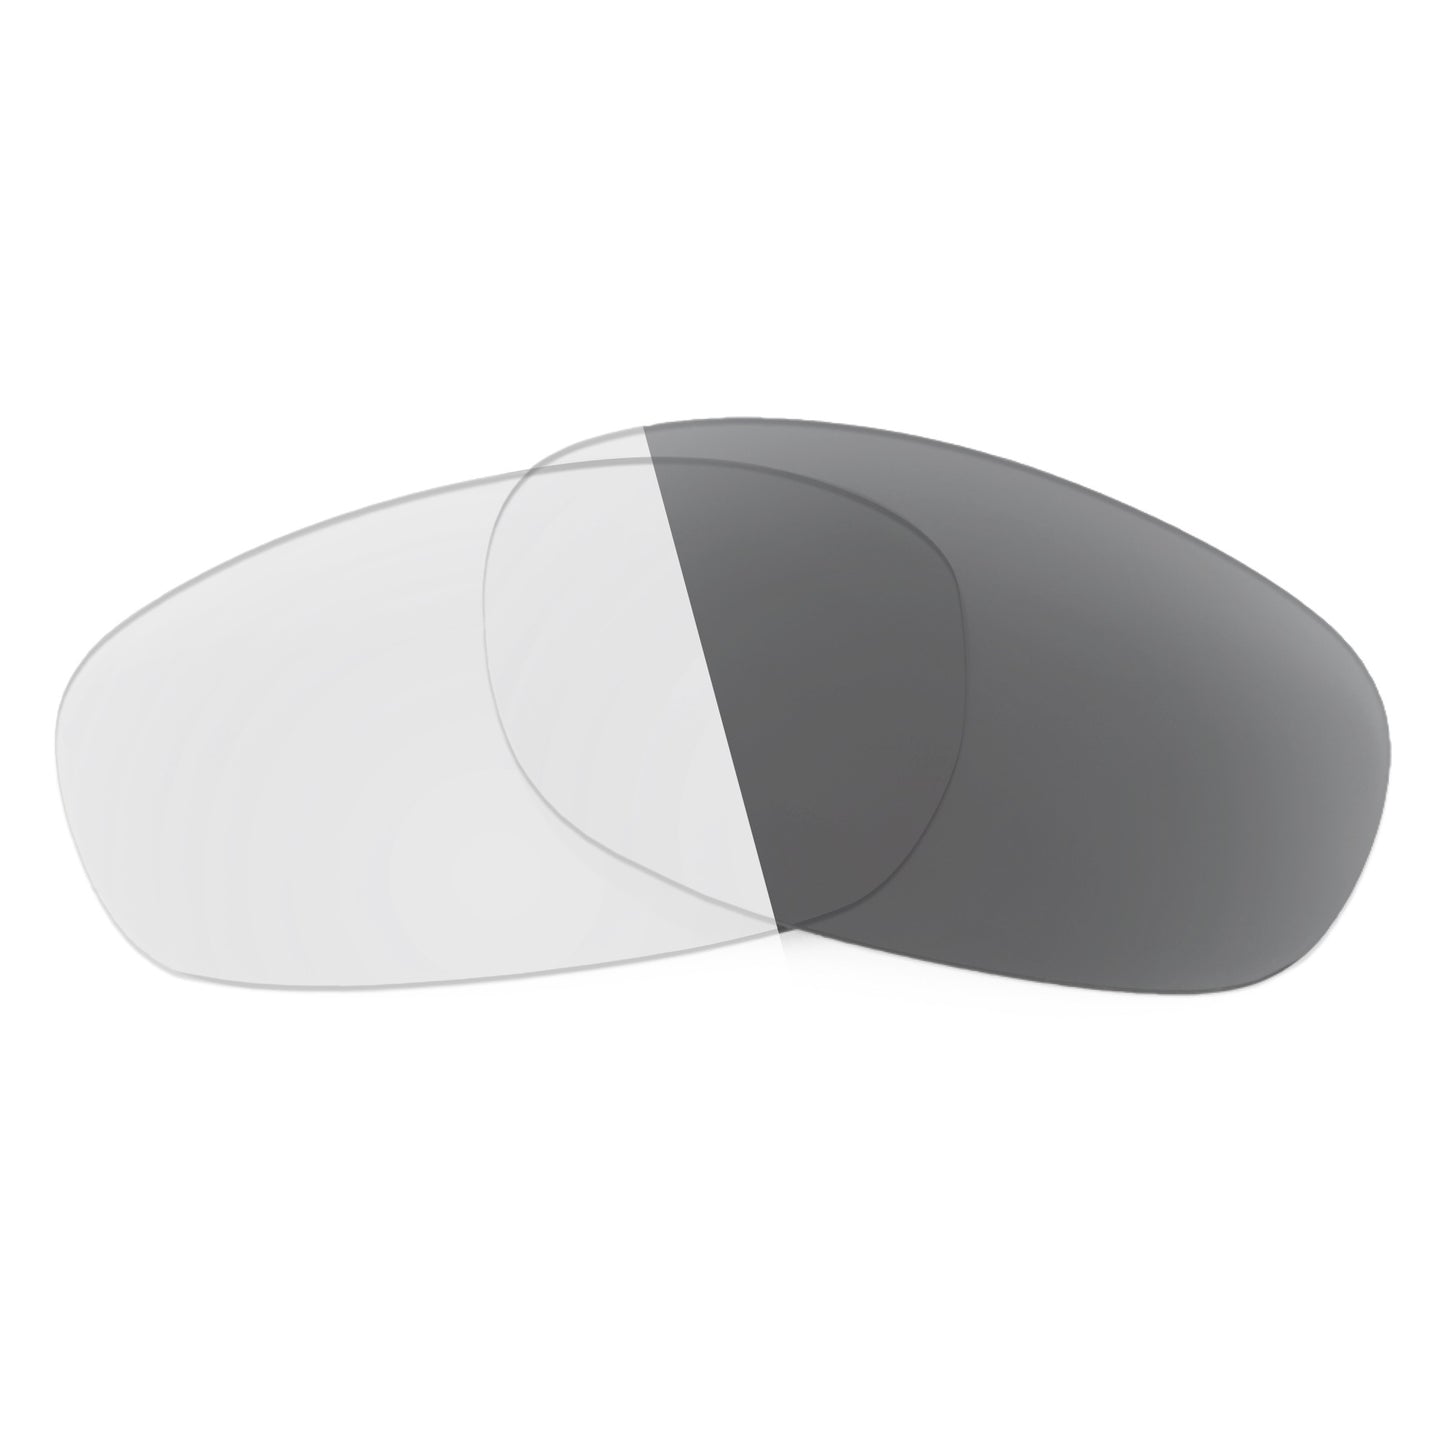 Revant replacement lenses for Wiley X Blink Non-Polarized Adapt Gray Photochromic